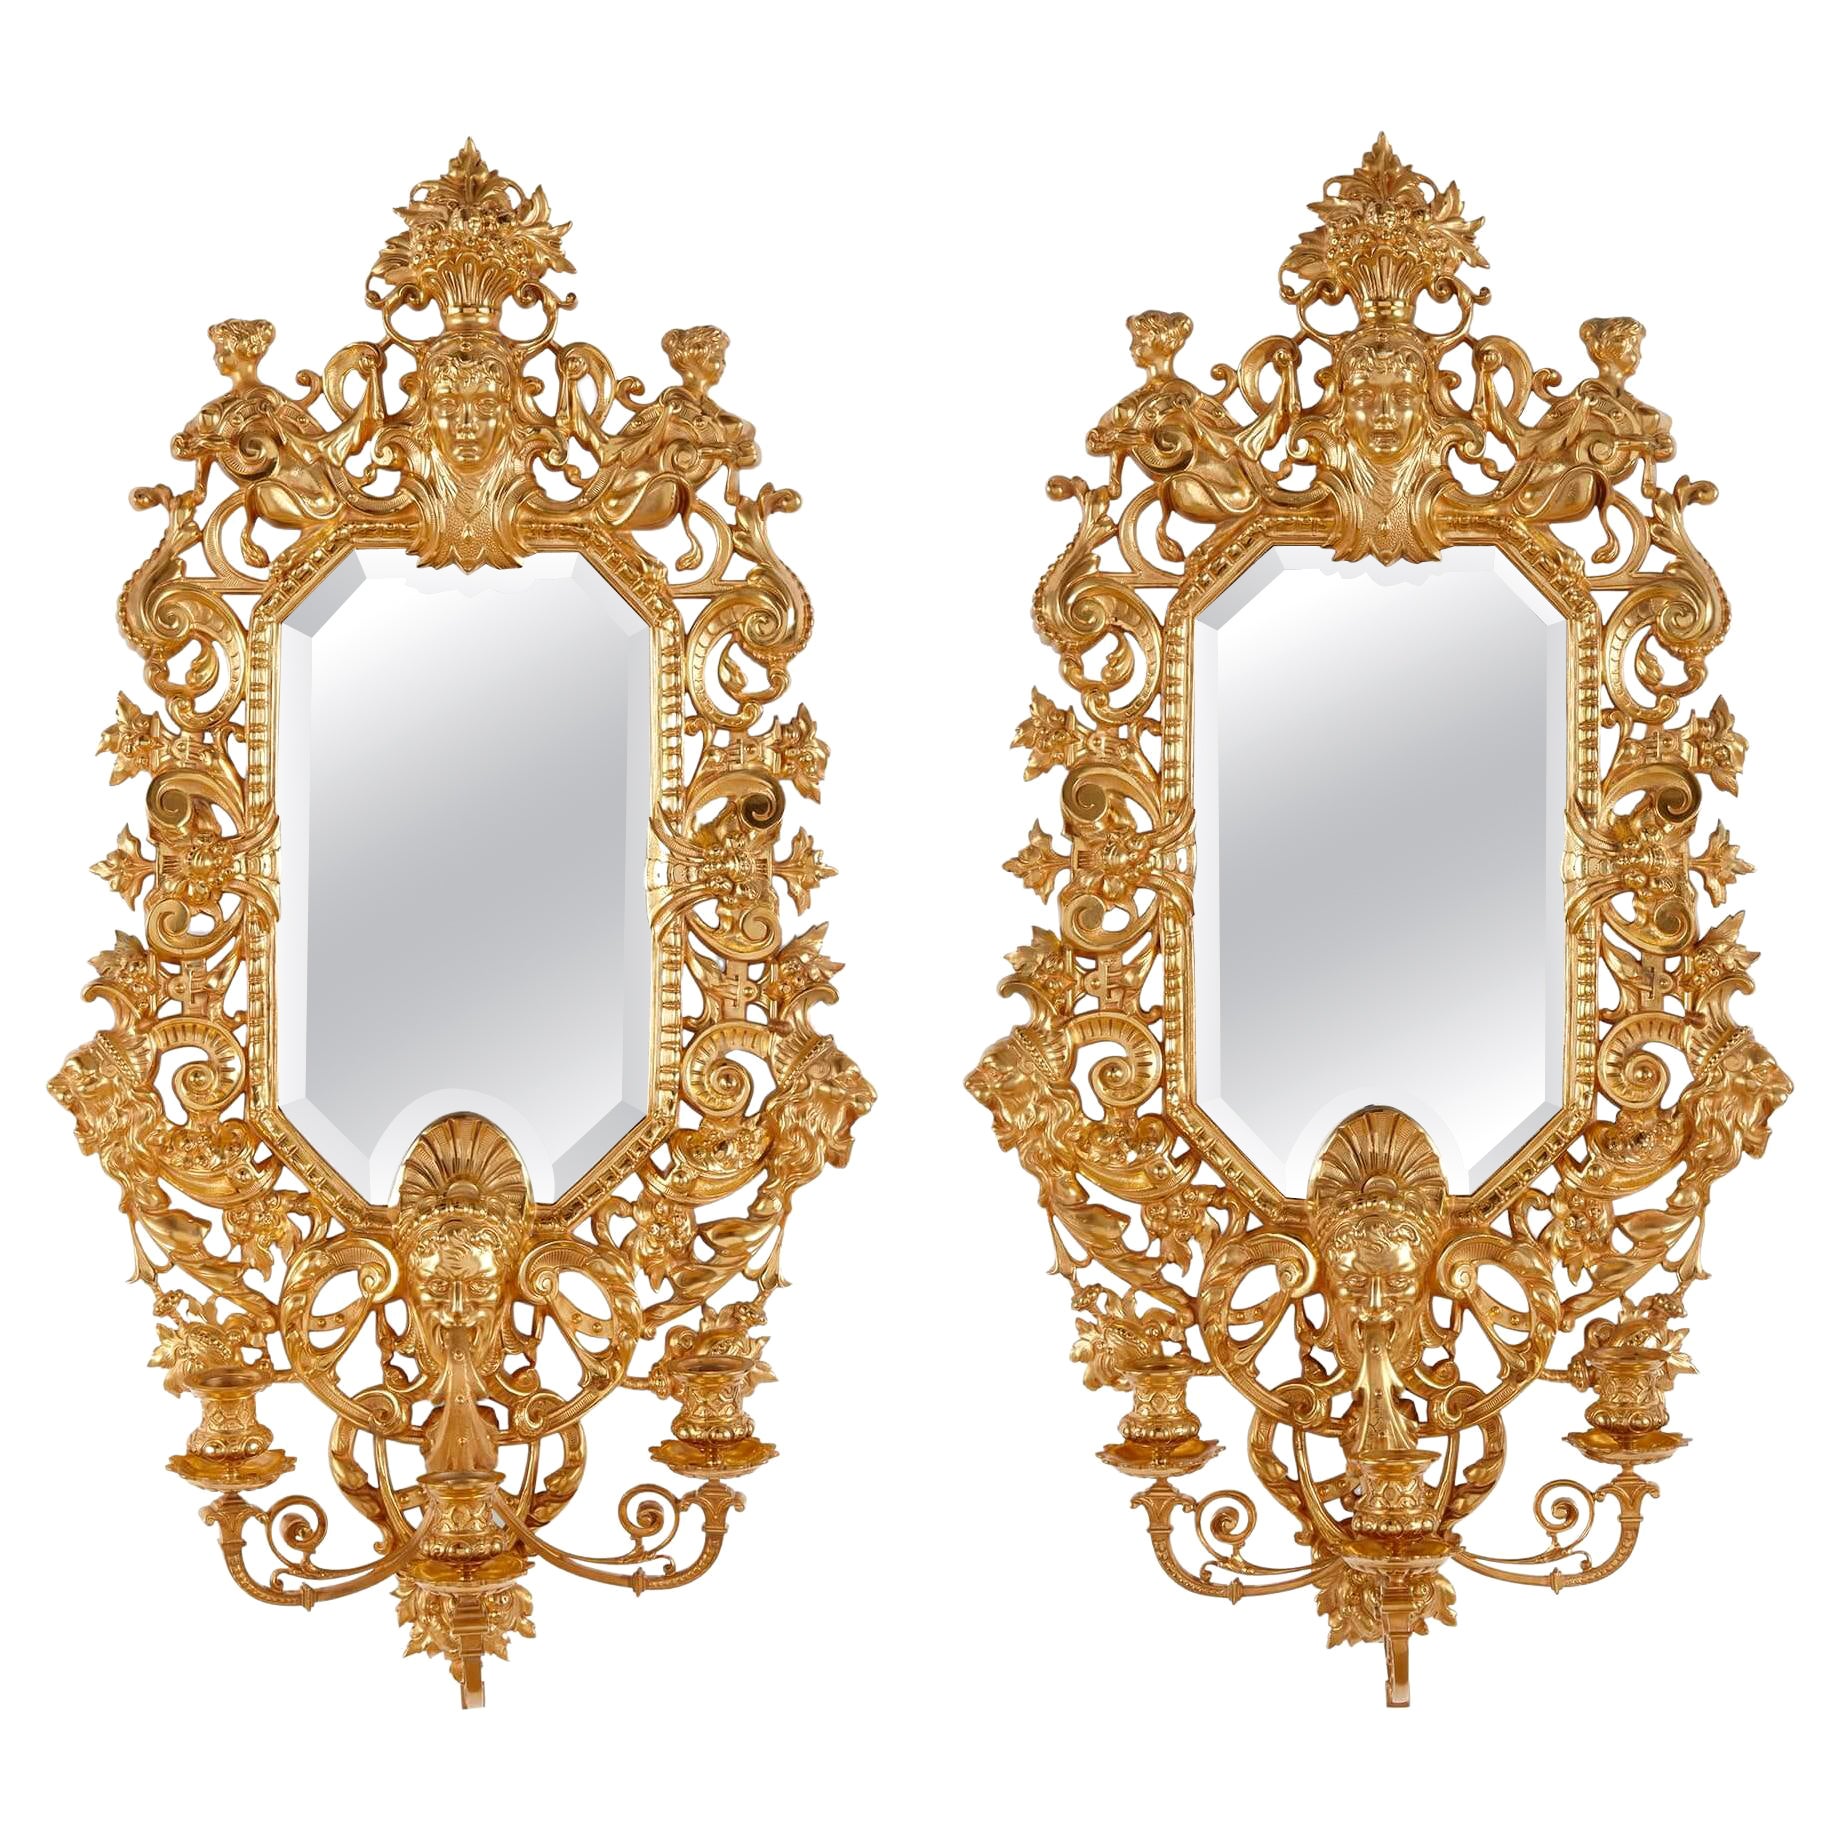 Pair of French Renaissance style Ormolu Wall Mirrors with Candelabra For Sale